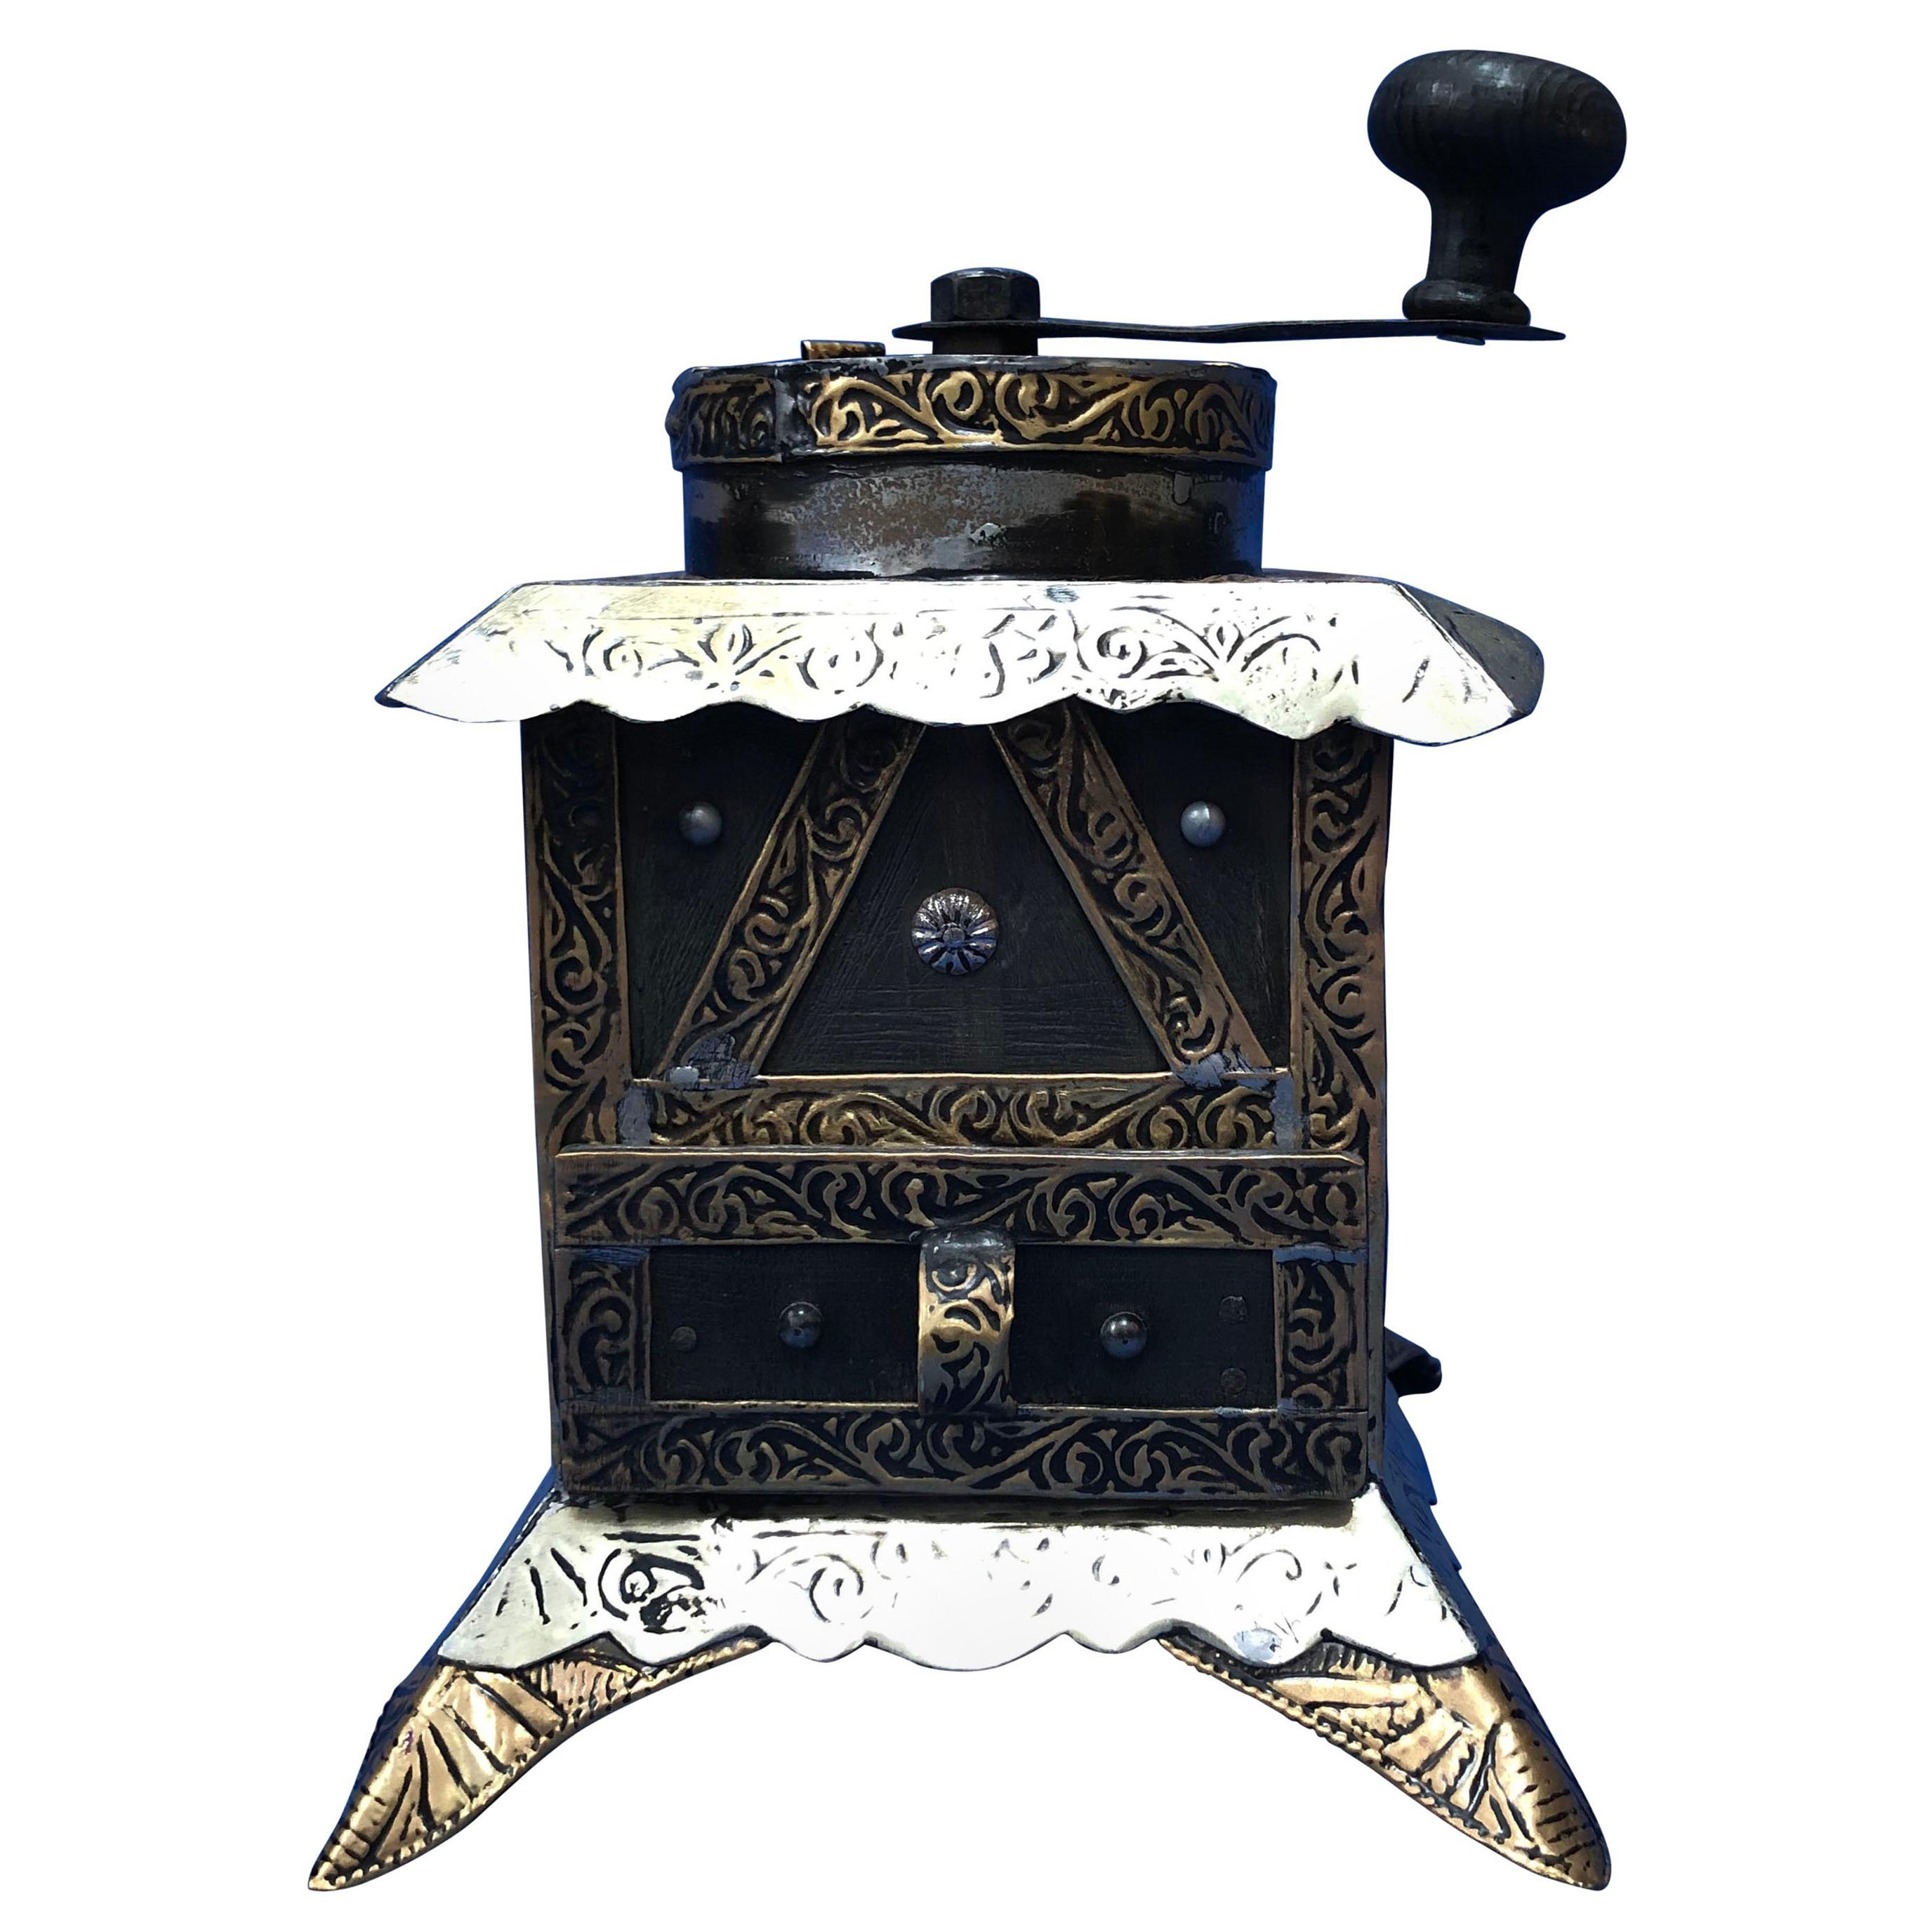 Vintage Handmade Moroccan Coffee Grinder - Silver & Brass Repousse, Ebony Wood For Sale